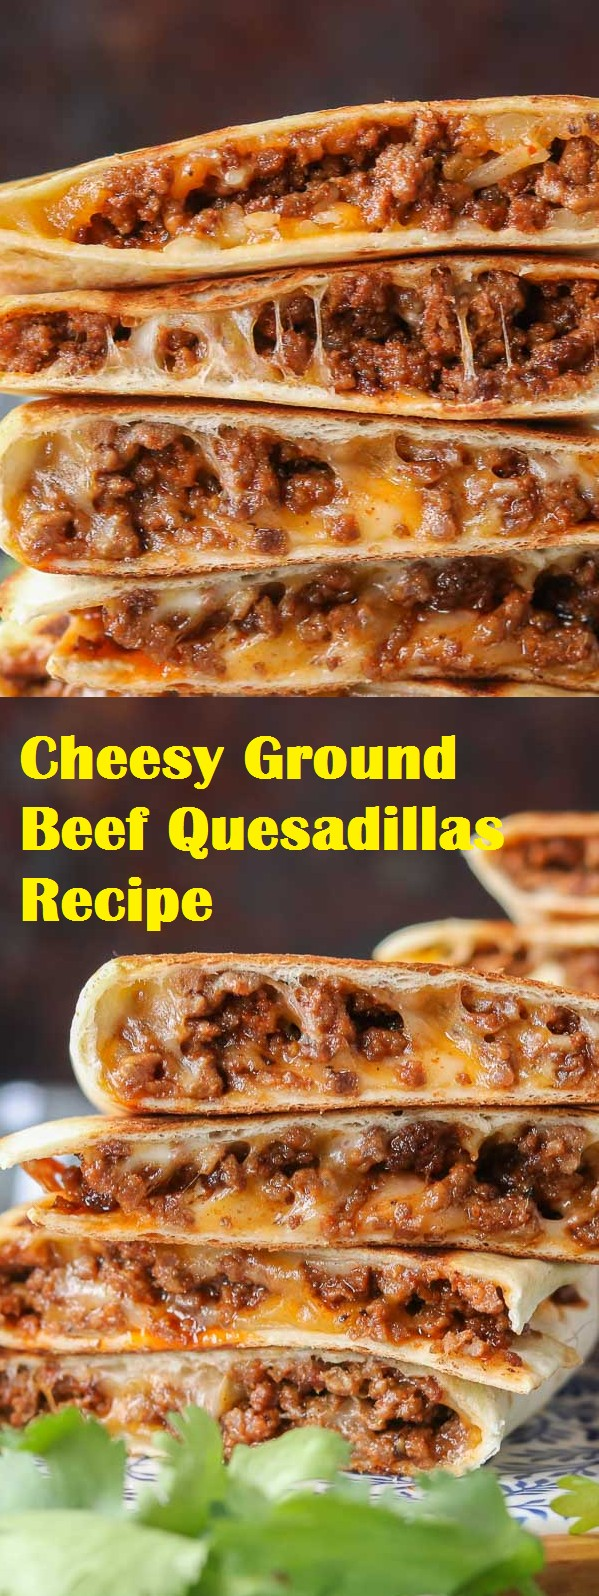 Cheesy Ground Beef Quesadillas Recipe - Food Wiches